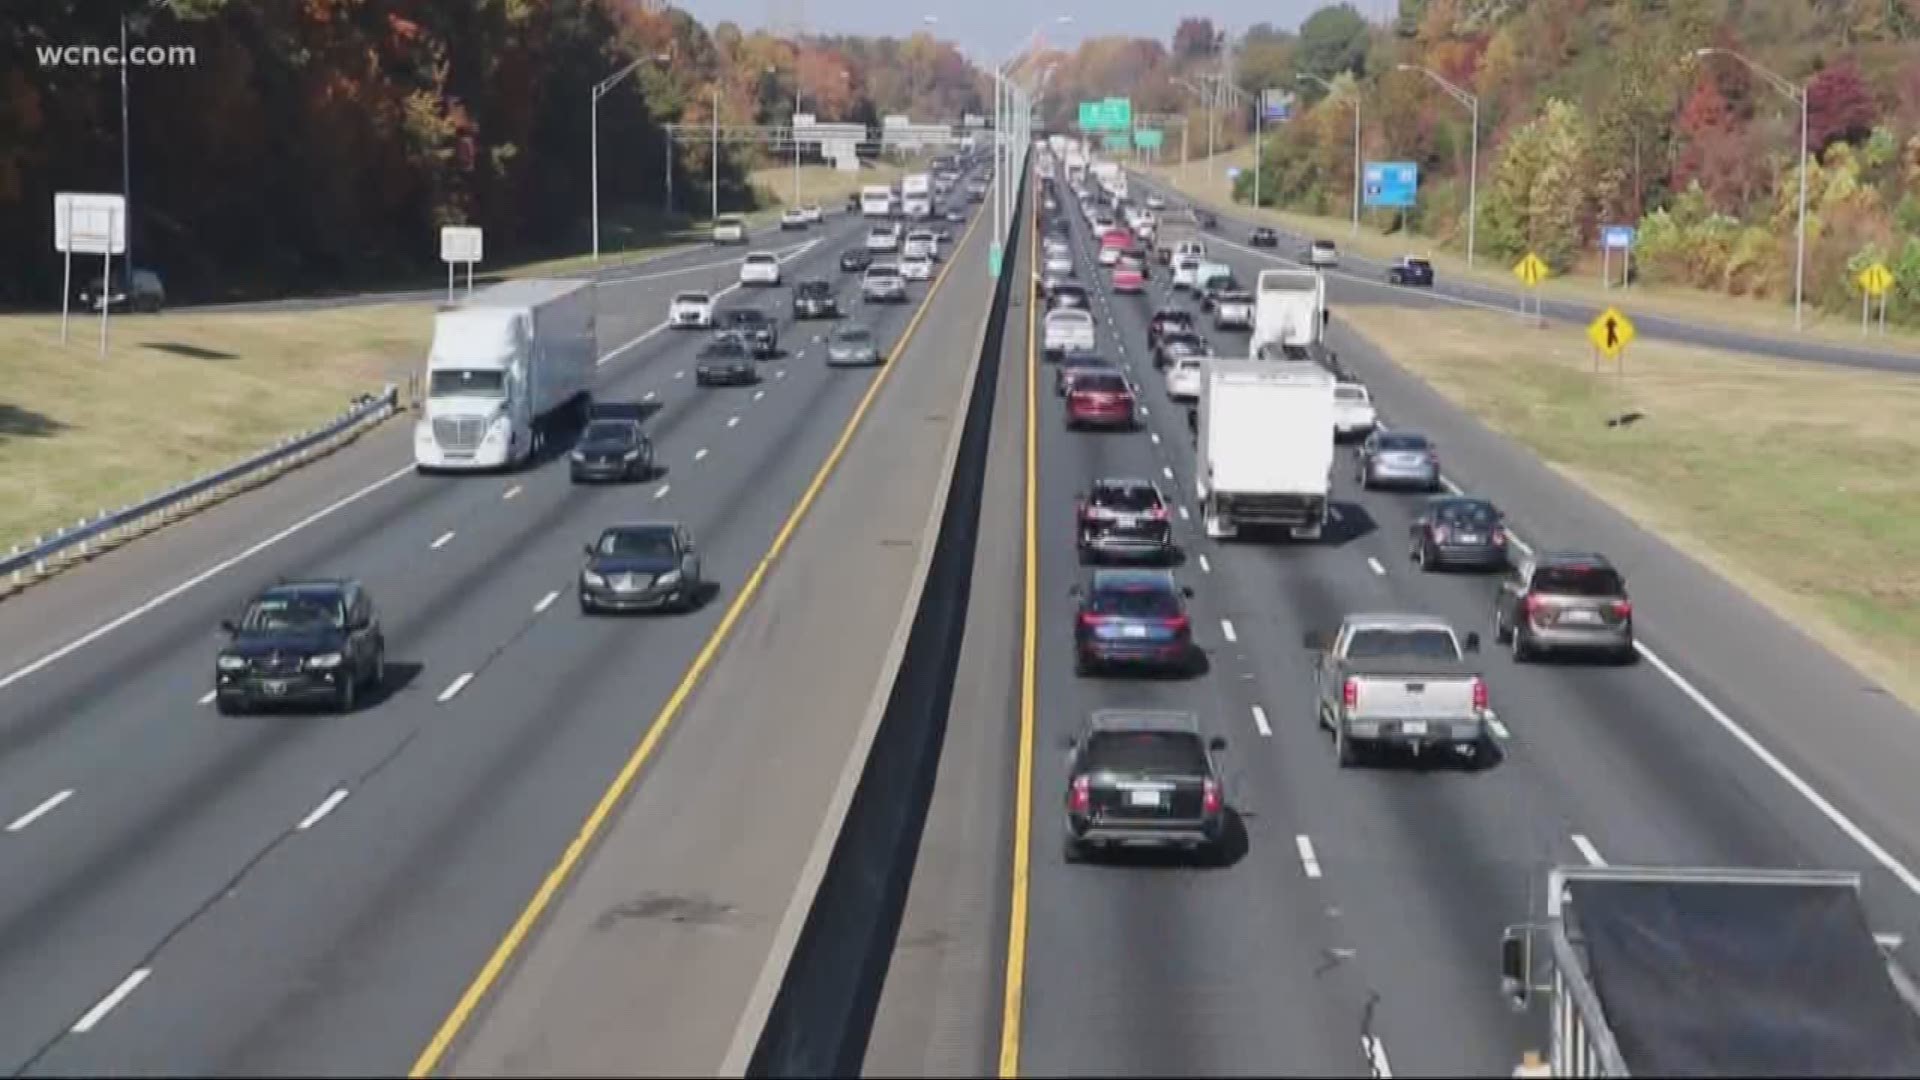 North Carolina Highway Patrol is stepping up its enforcement ahead of the busy Thanksgiving holiday as more than 48 million Americans are set to hit the roads.